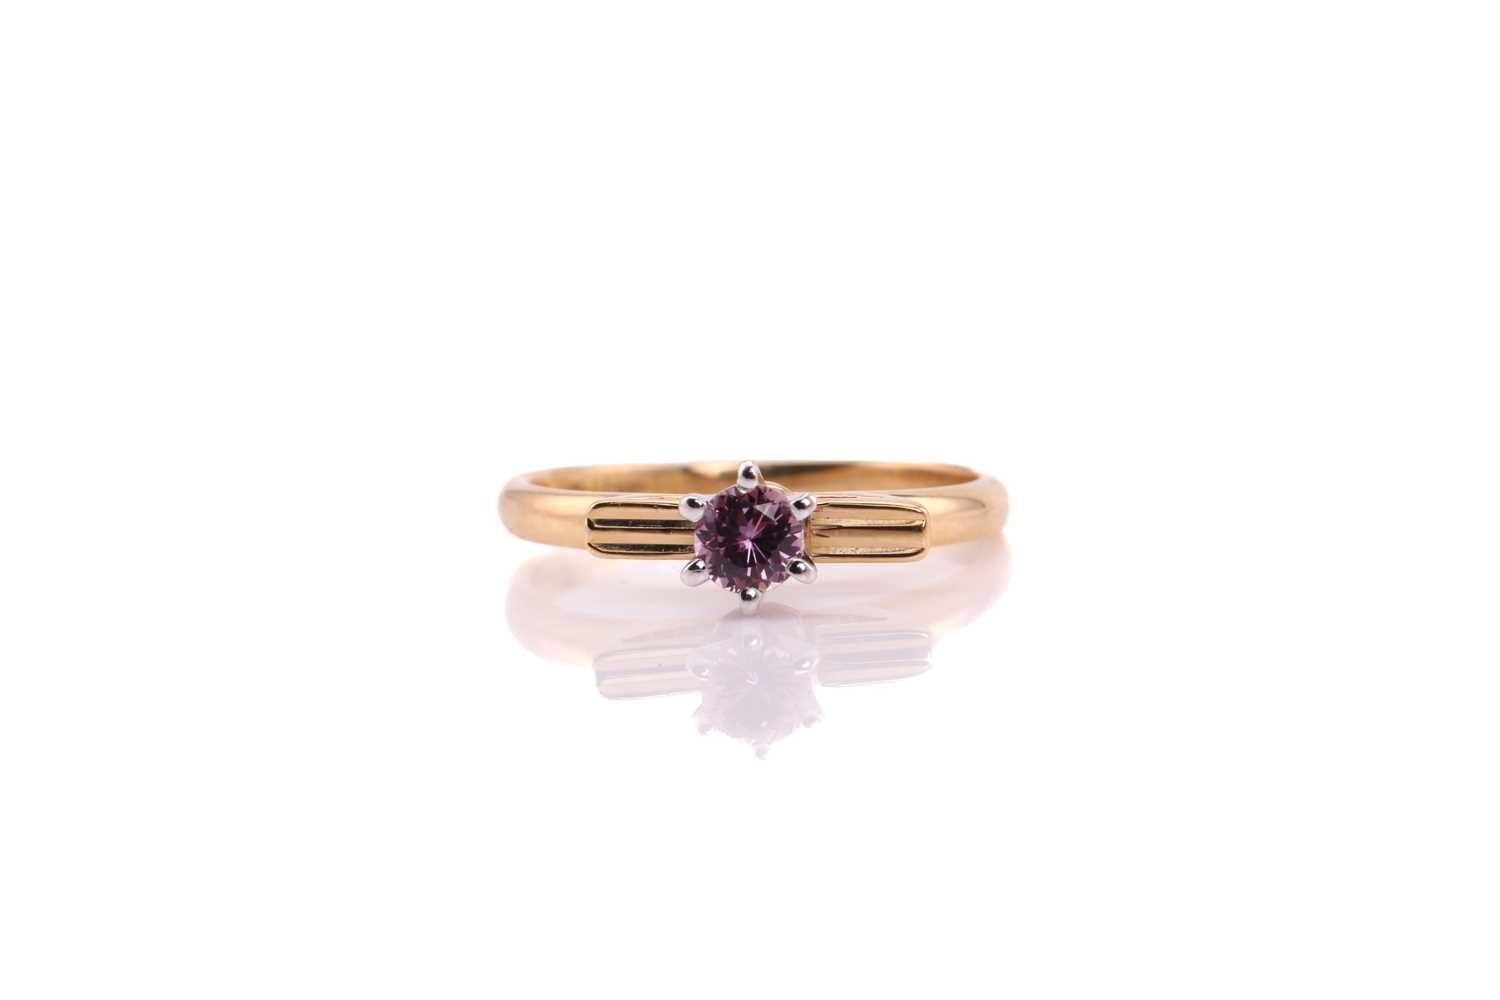 A pink sapphire solitaire ring, comprises a round pale pink sapphire approximately measuring 3.8 mm,